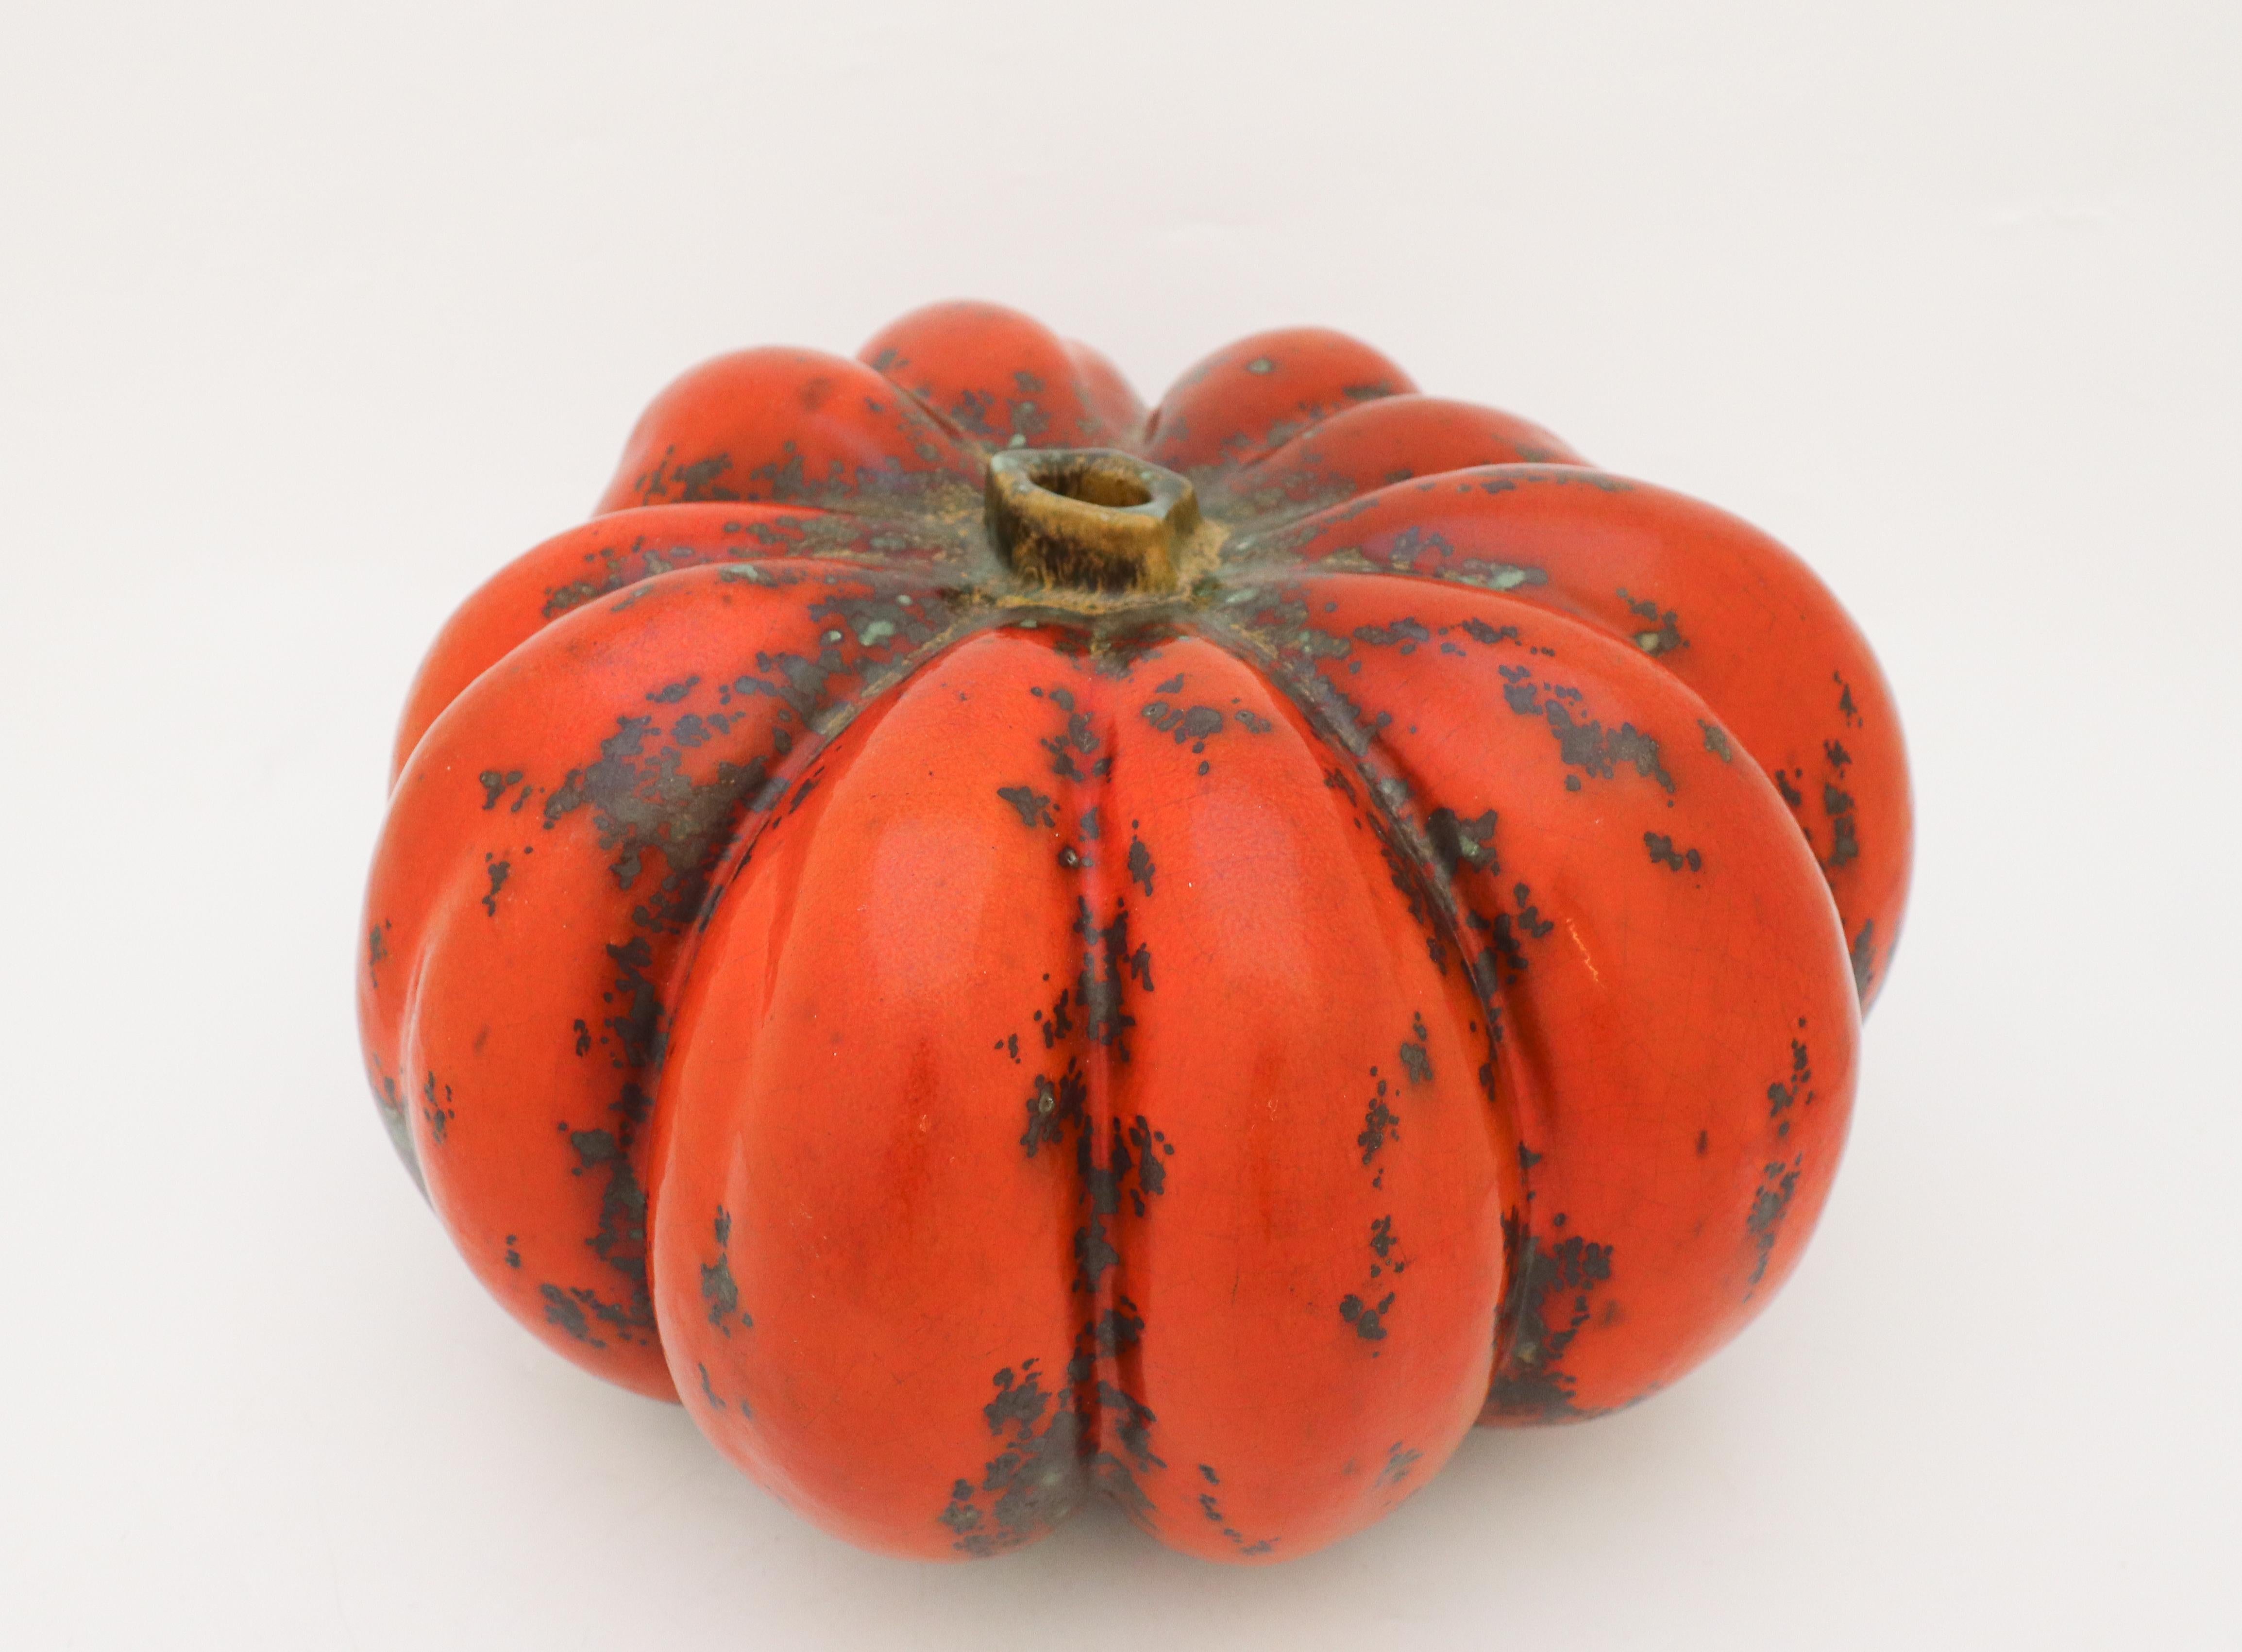 Just a stunning pumpkin made by Hans Hedberg (1917-2007) Swedish ceramist who had his studio in Biot, near Nice in France.

Hedberg worked with several famous artists, among Picasso, Léger and Matisse.
It is signed and in very good condition, it